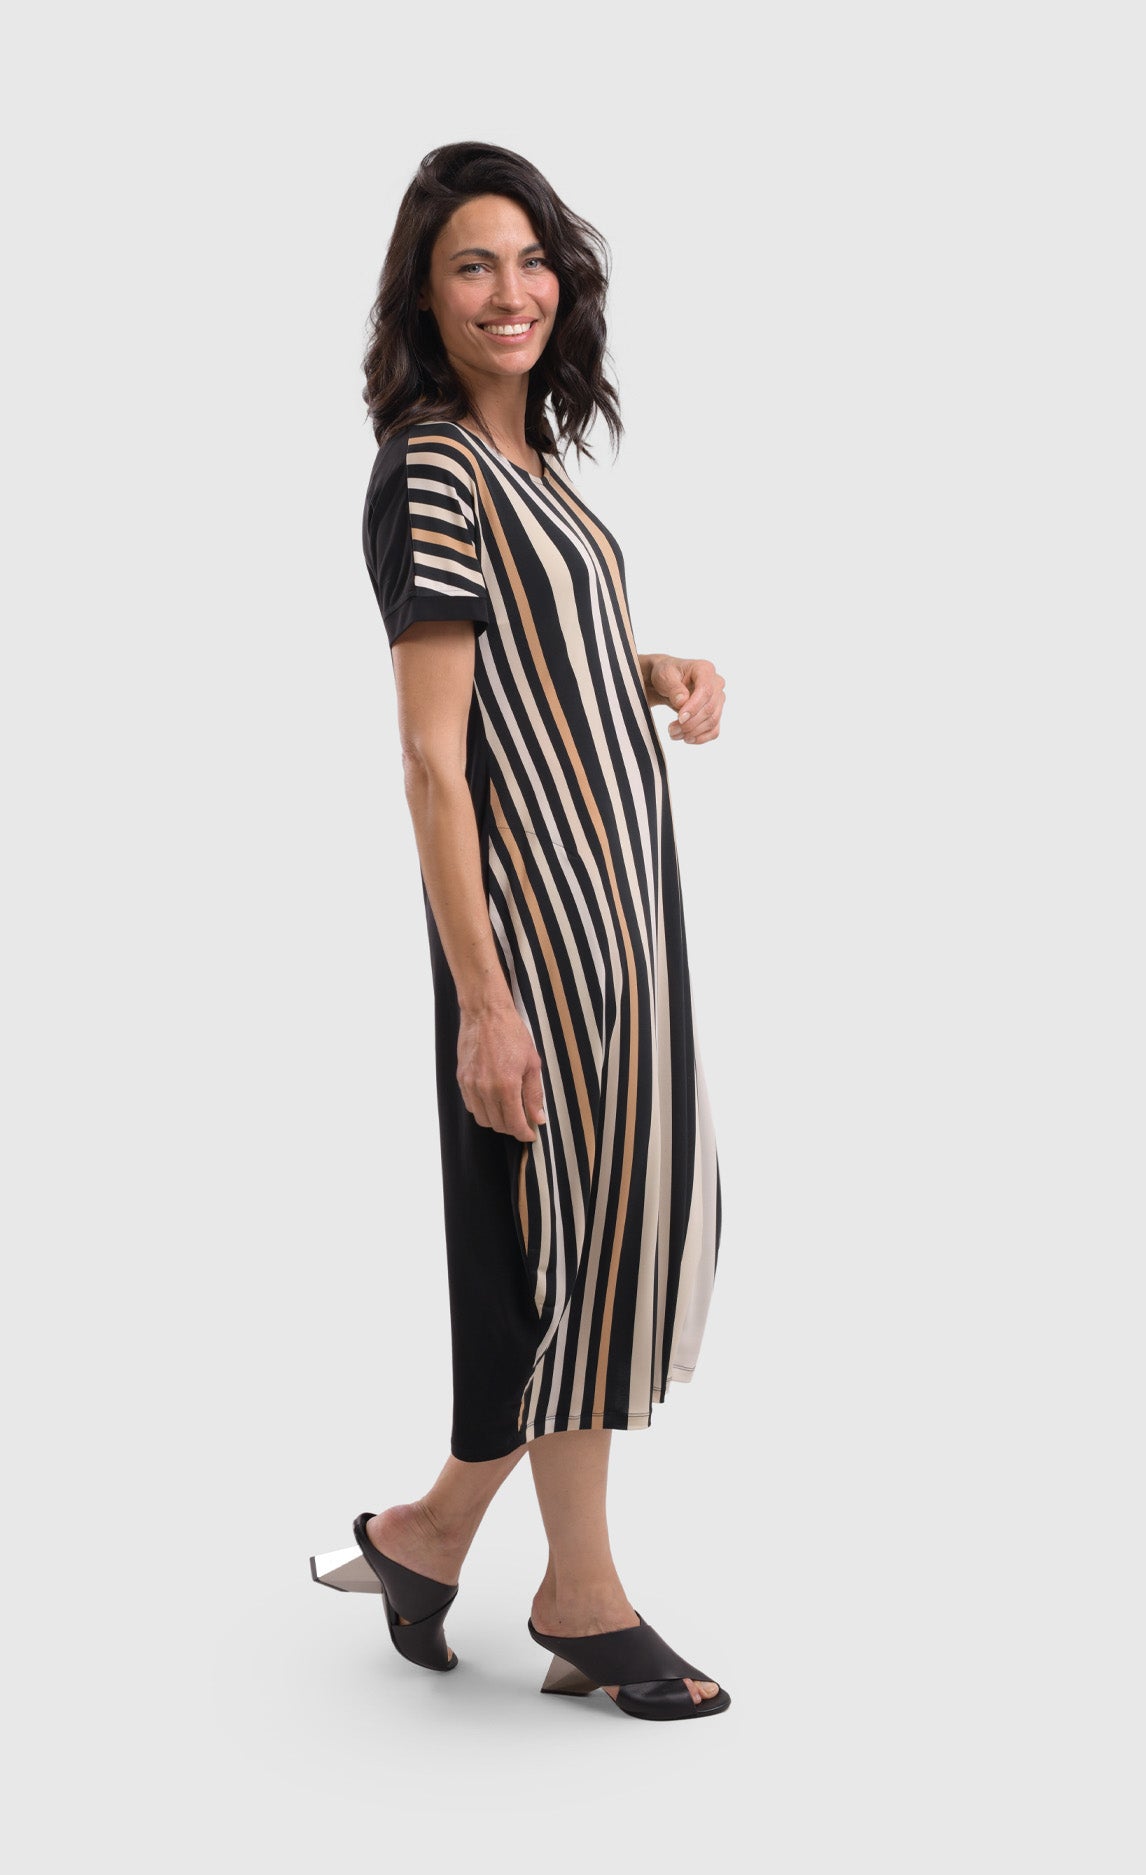 Right side full body view of a woman wearing the alembika sunrise stripe dress. This dress has black and white vertical stripes with a couple of tan stripes in between on the front and a solid back. The dress has short sleeves, a relaxed silhouette with a poof skirt, and two side pockets. This dress sits mid calf level.